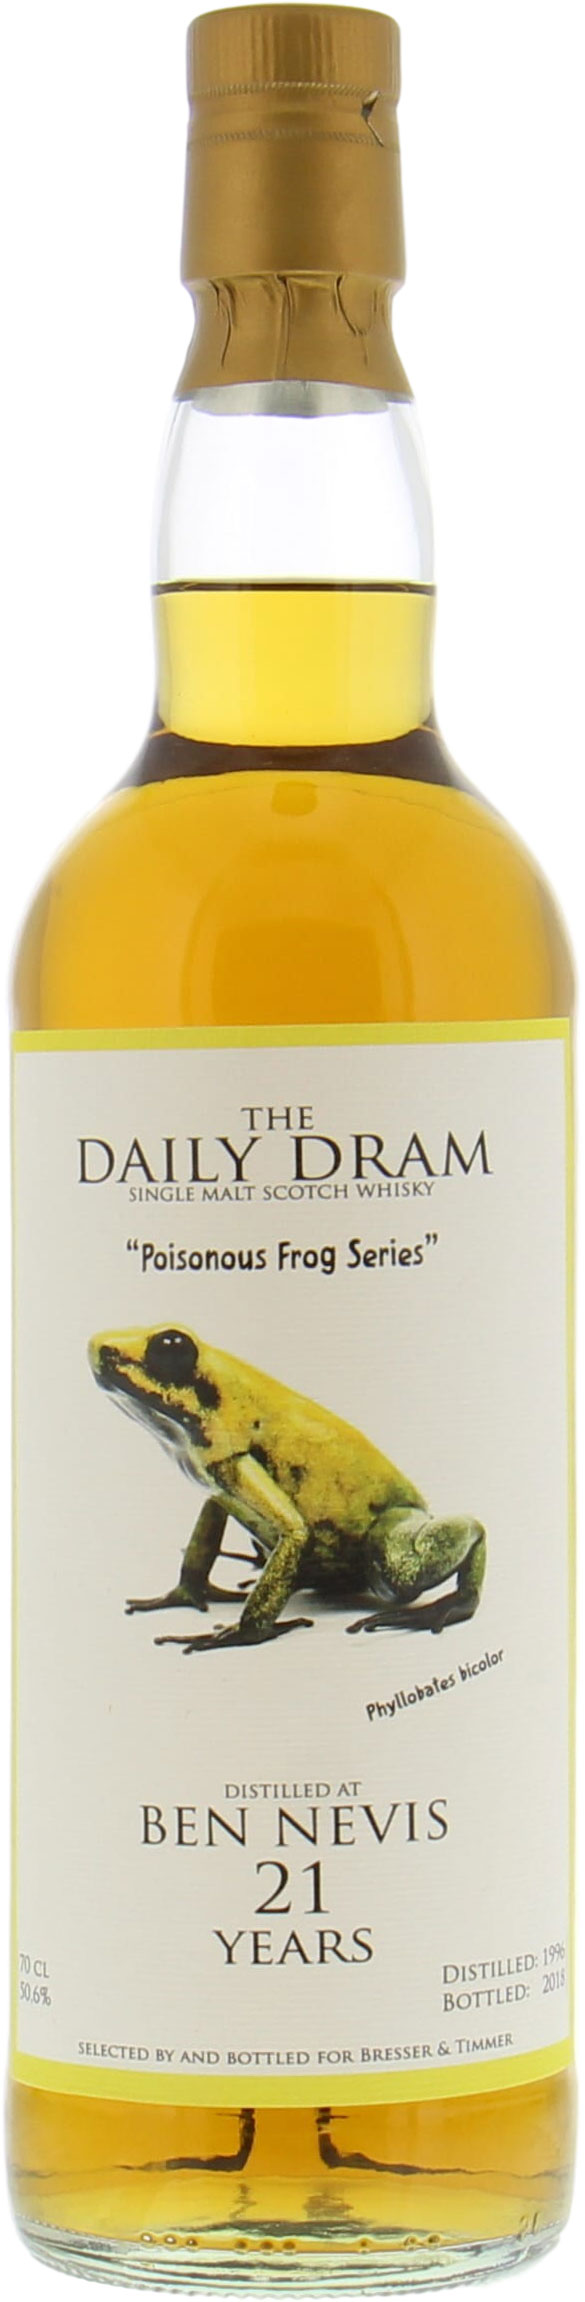 Ben Nevis - Daily Dram 21 Years Old Poisonous Frog 50.6% 1996